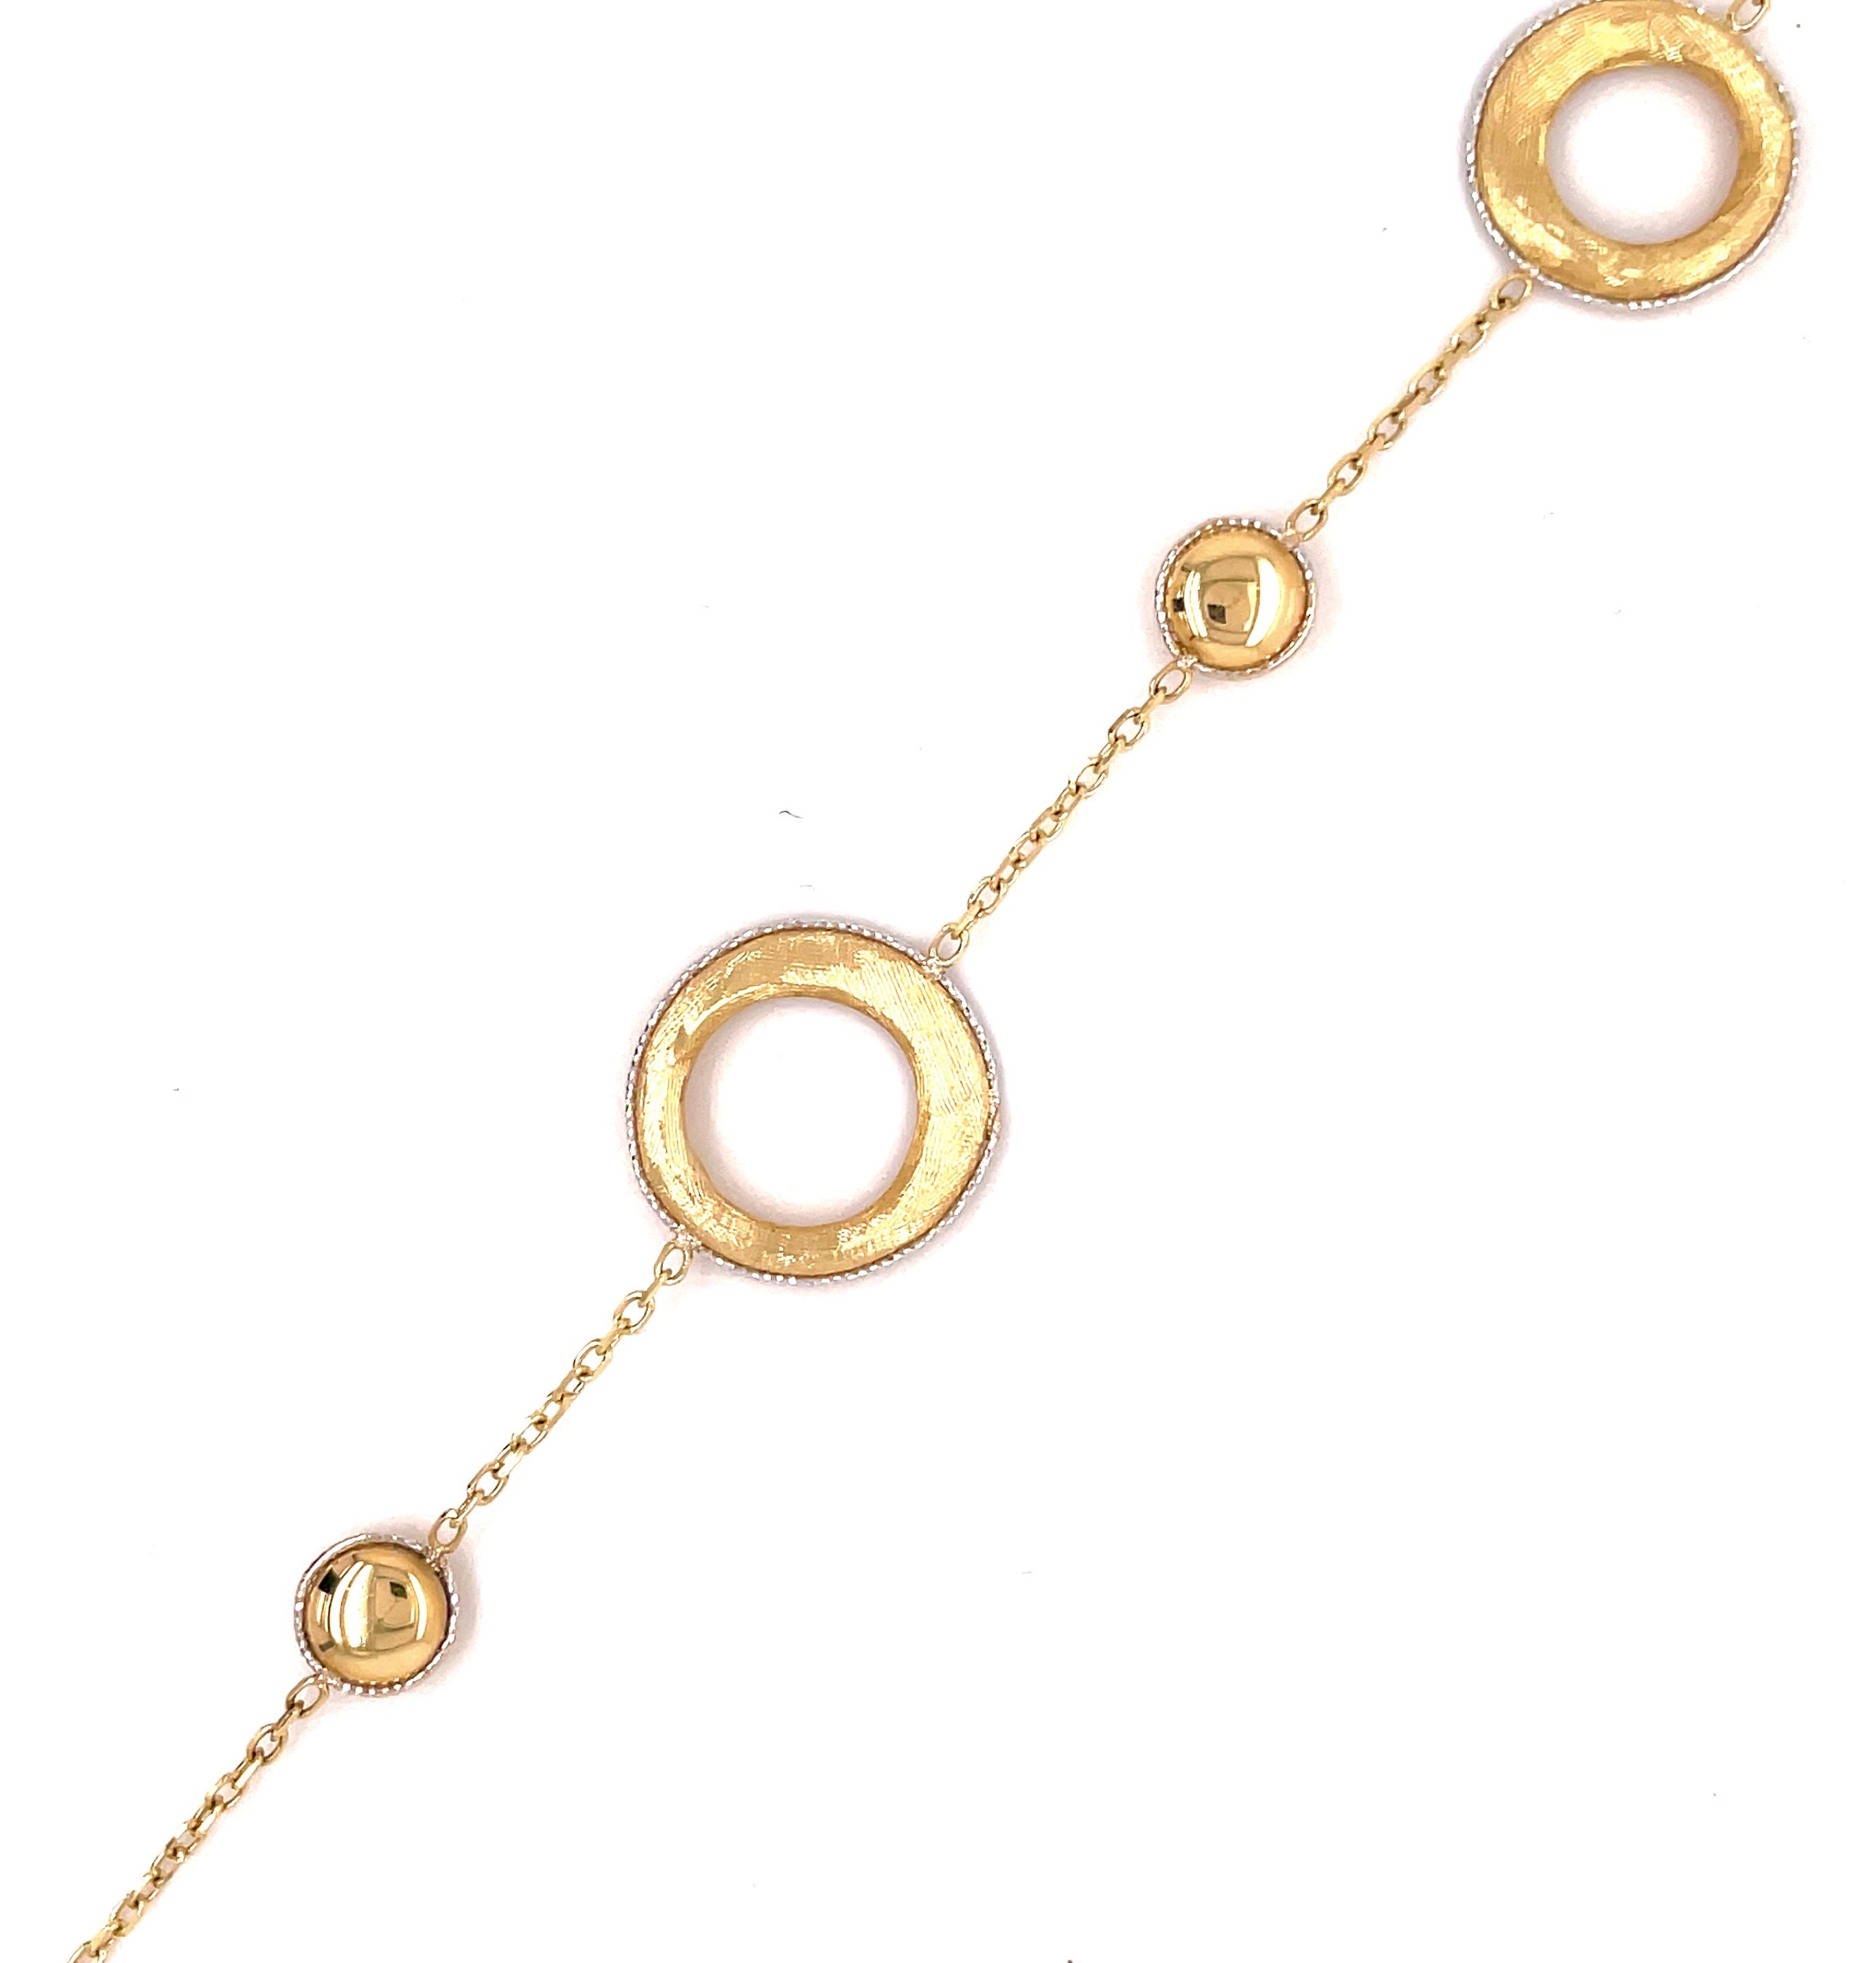 Made from 14k yellow and white gold, this 7" long bracelet features a 16.00mm large circle, which is fastened with a secure lobster catch. White gold is featured at the edge of the circle, adding a special sparkle.